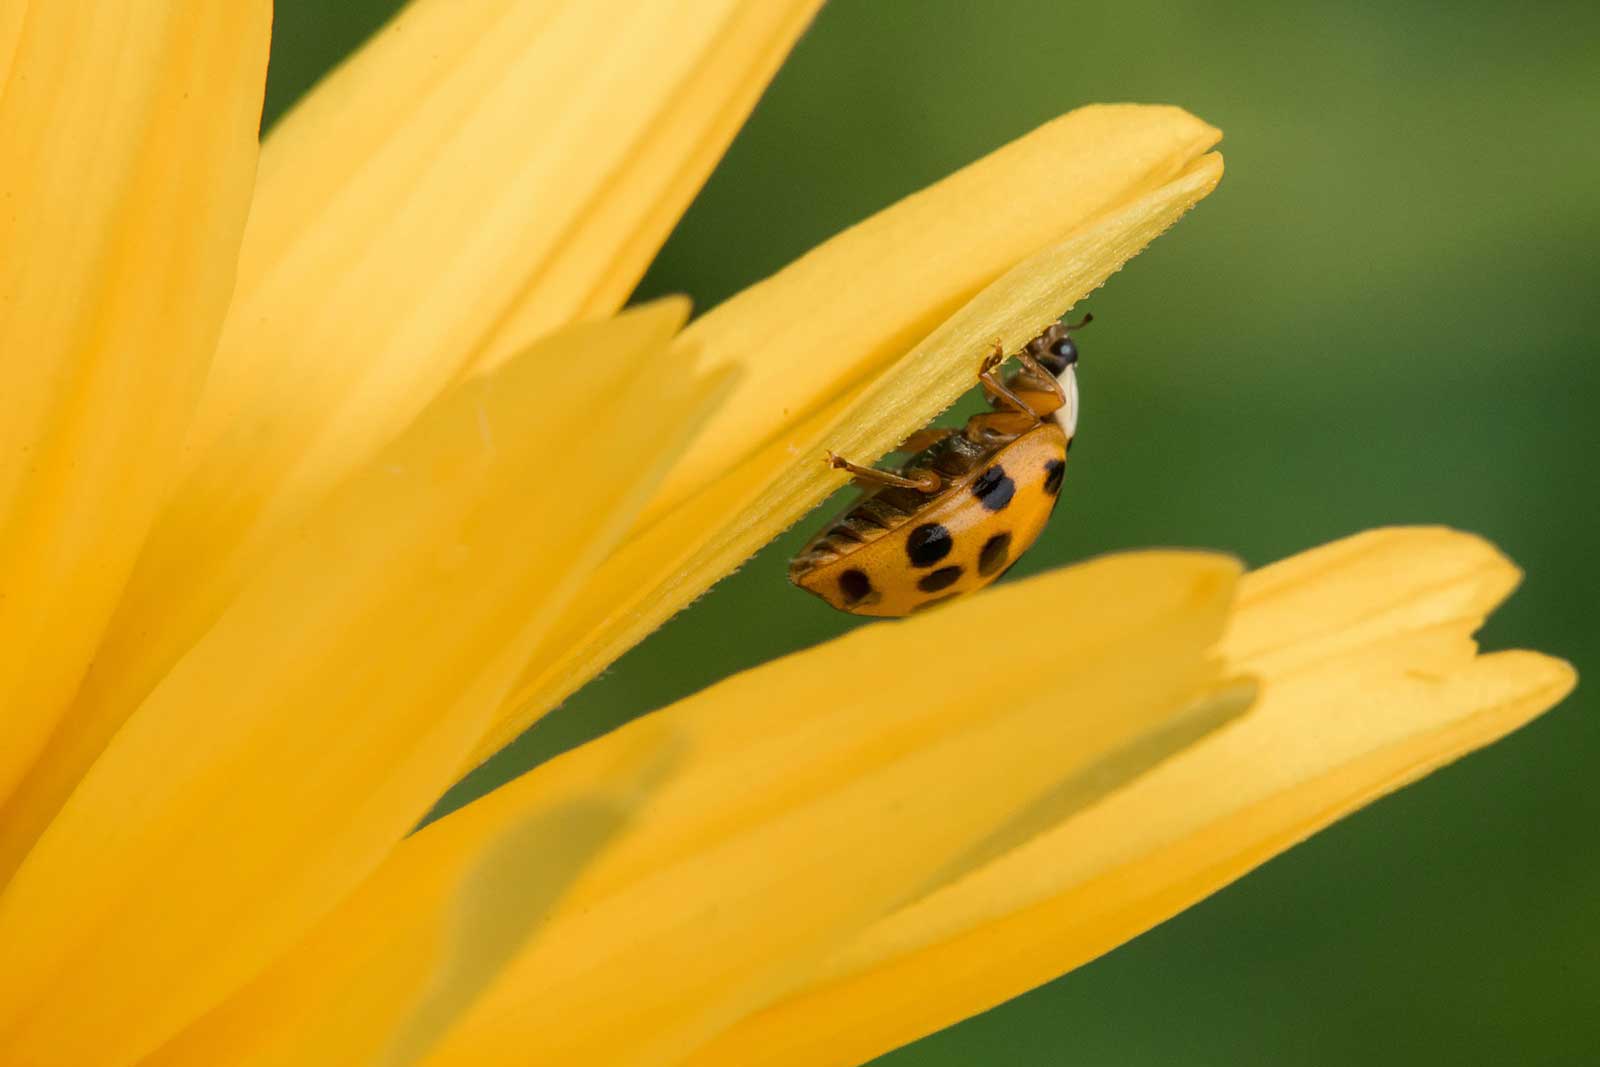 Beneficial Insect Ladybug on Flower Petal